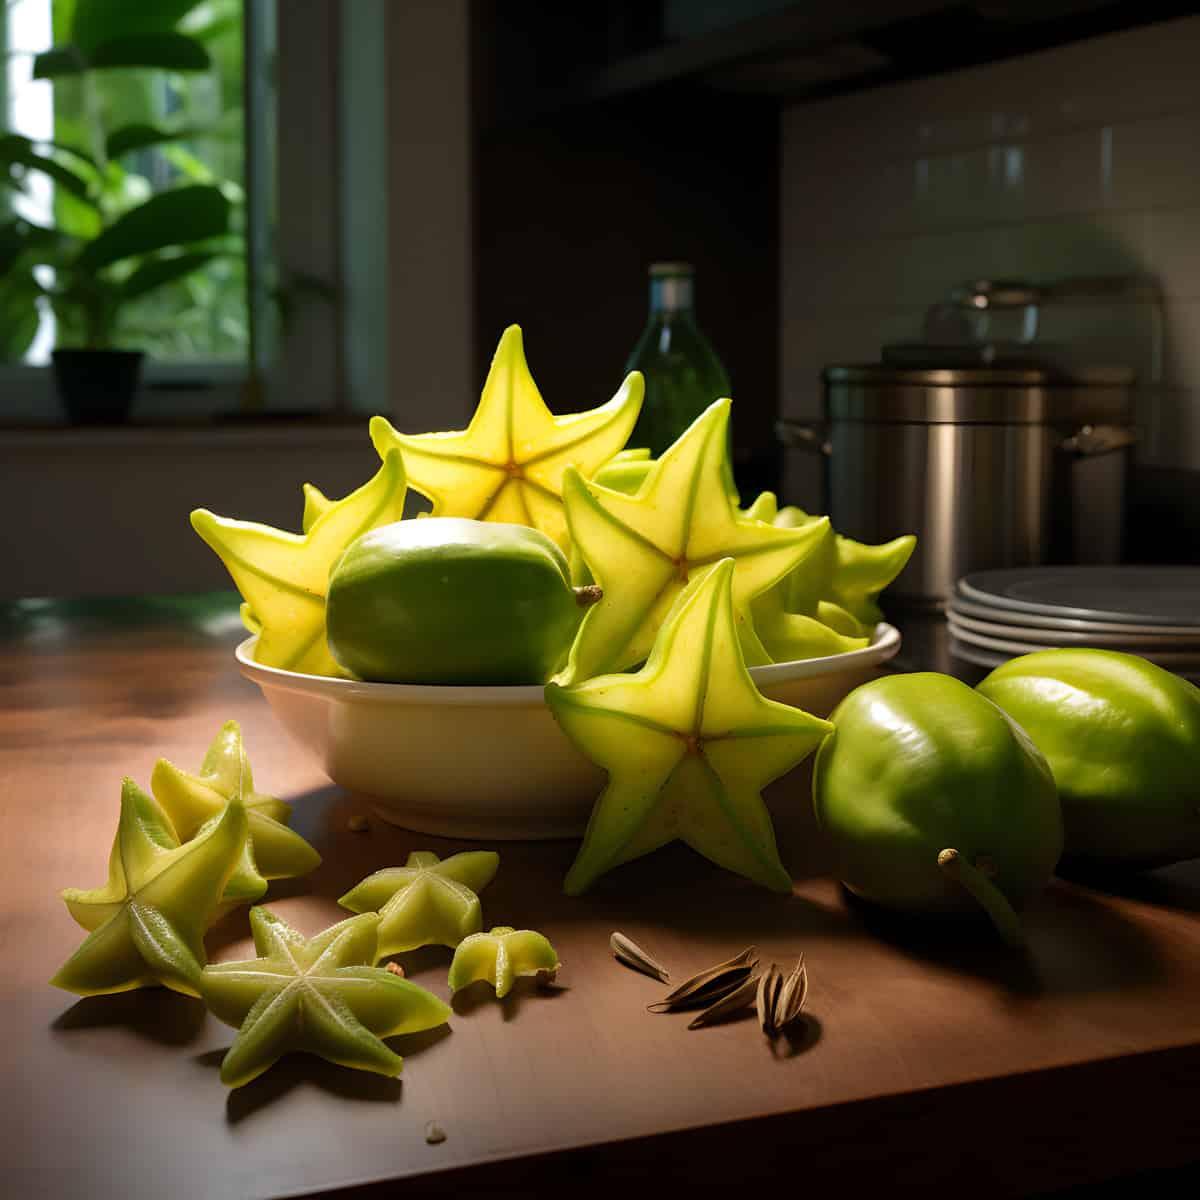 Star Fruit on a kitchen counter